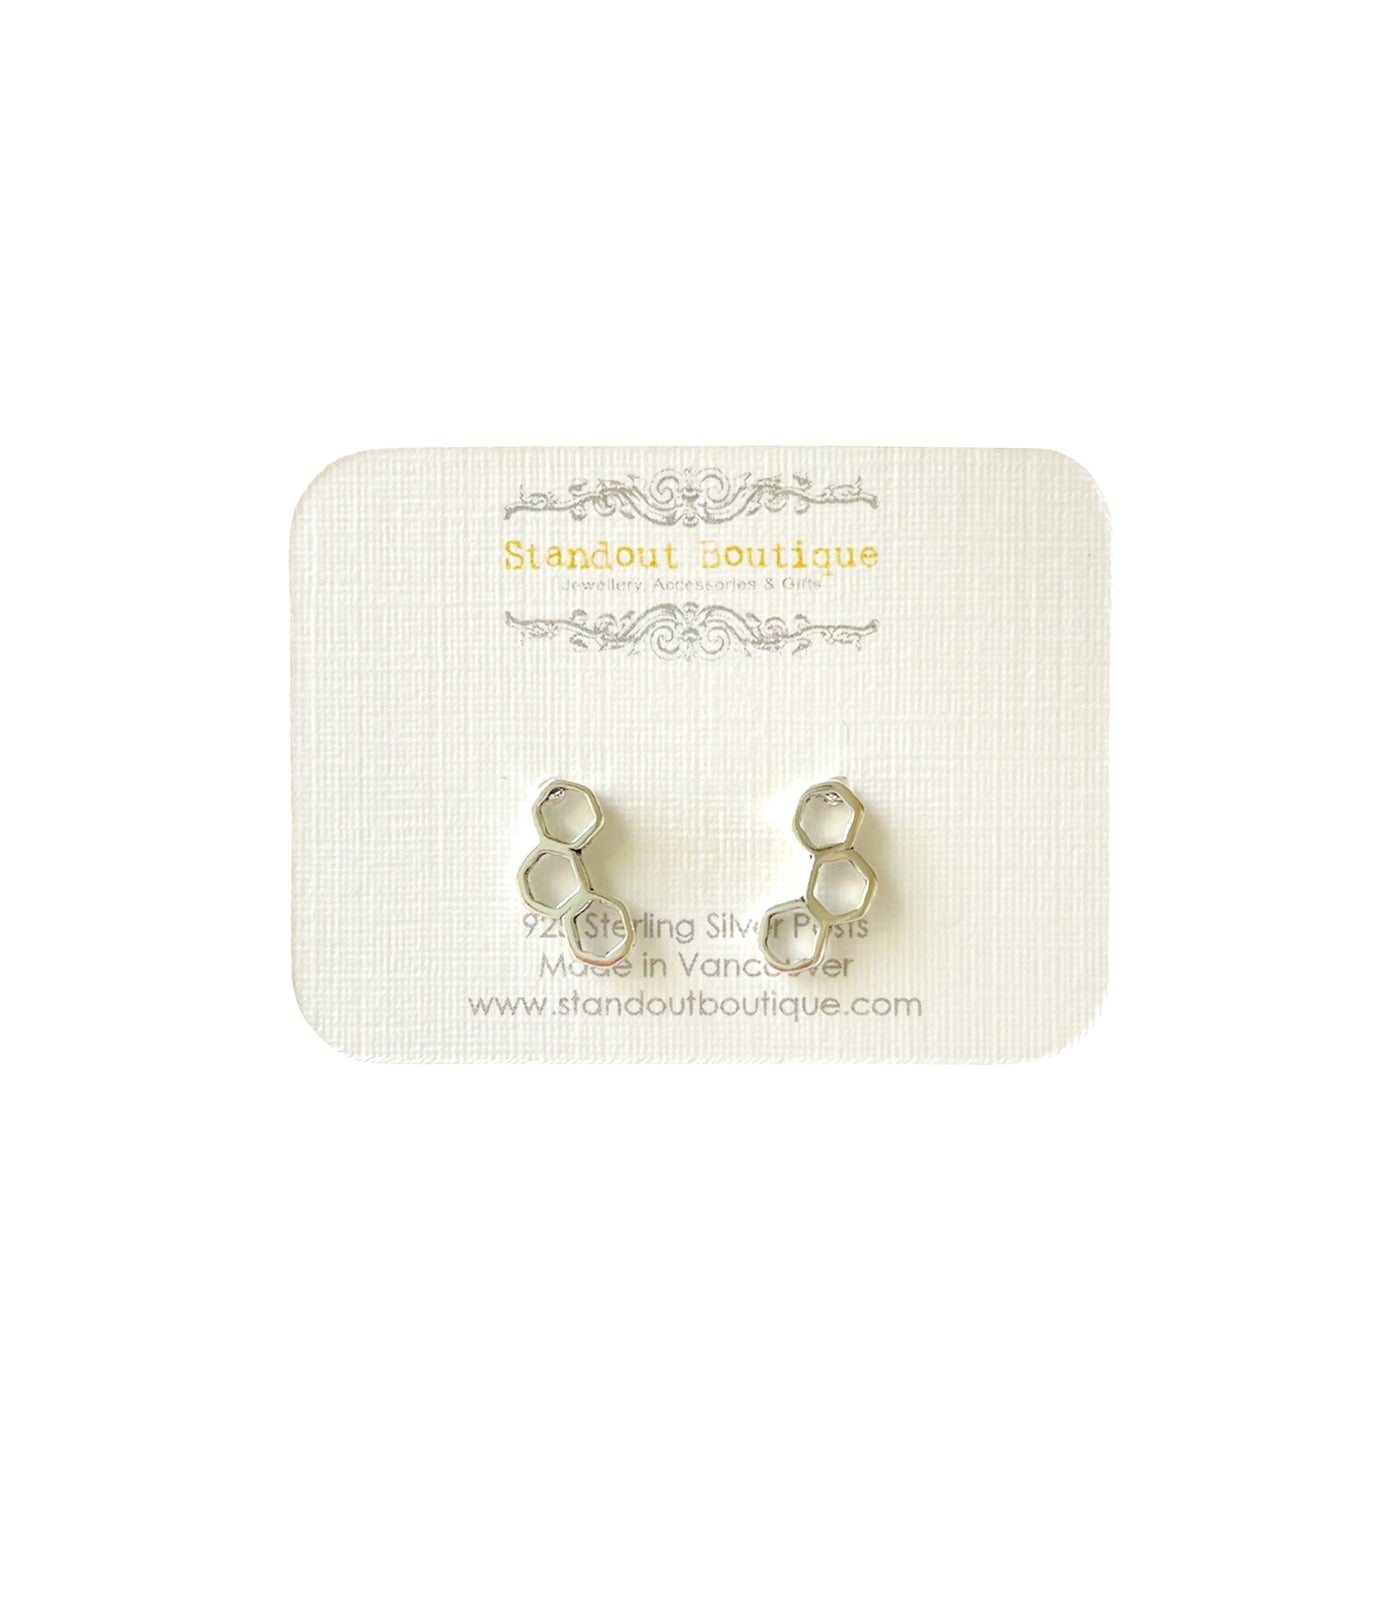 Beehive Sterling Silver Studs